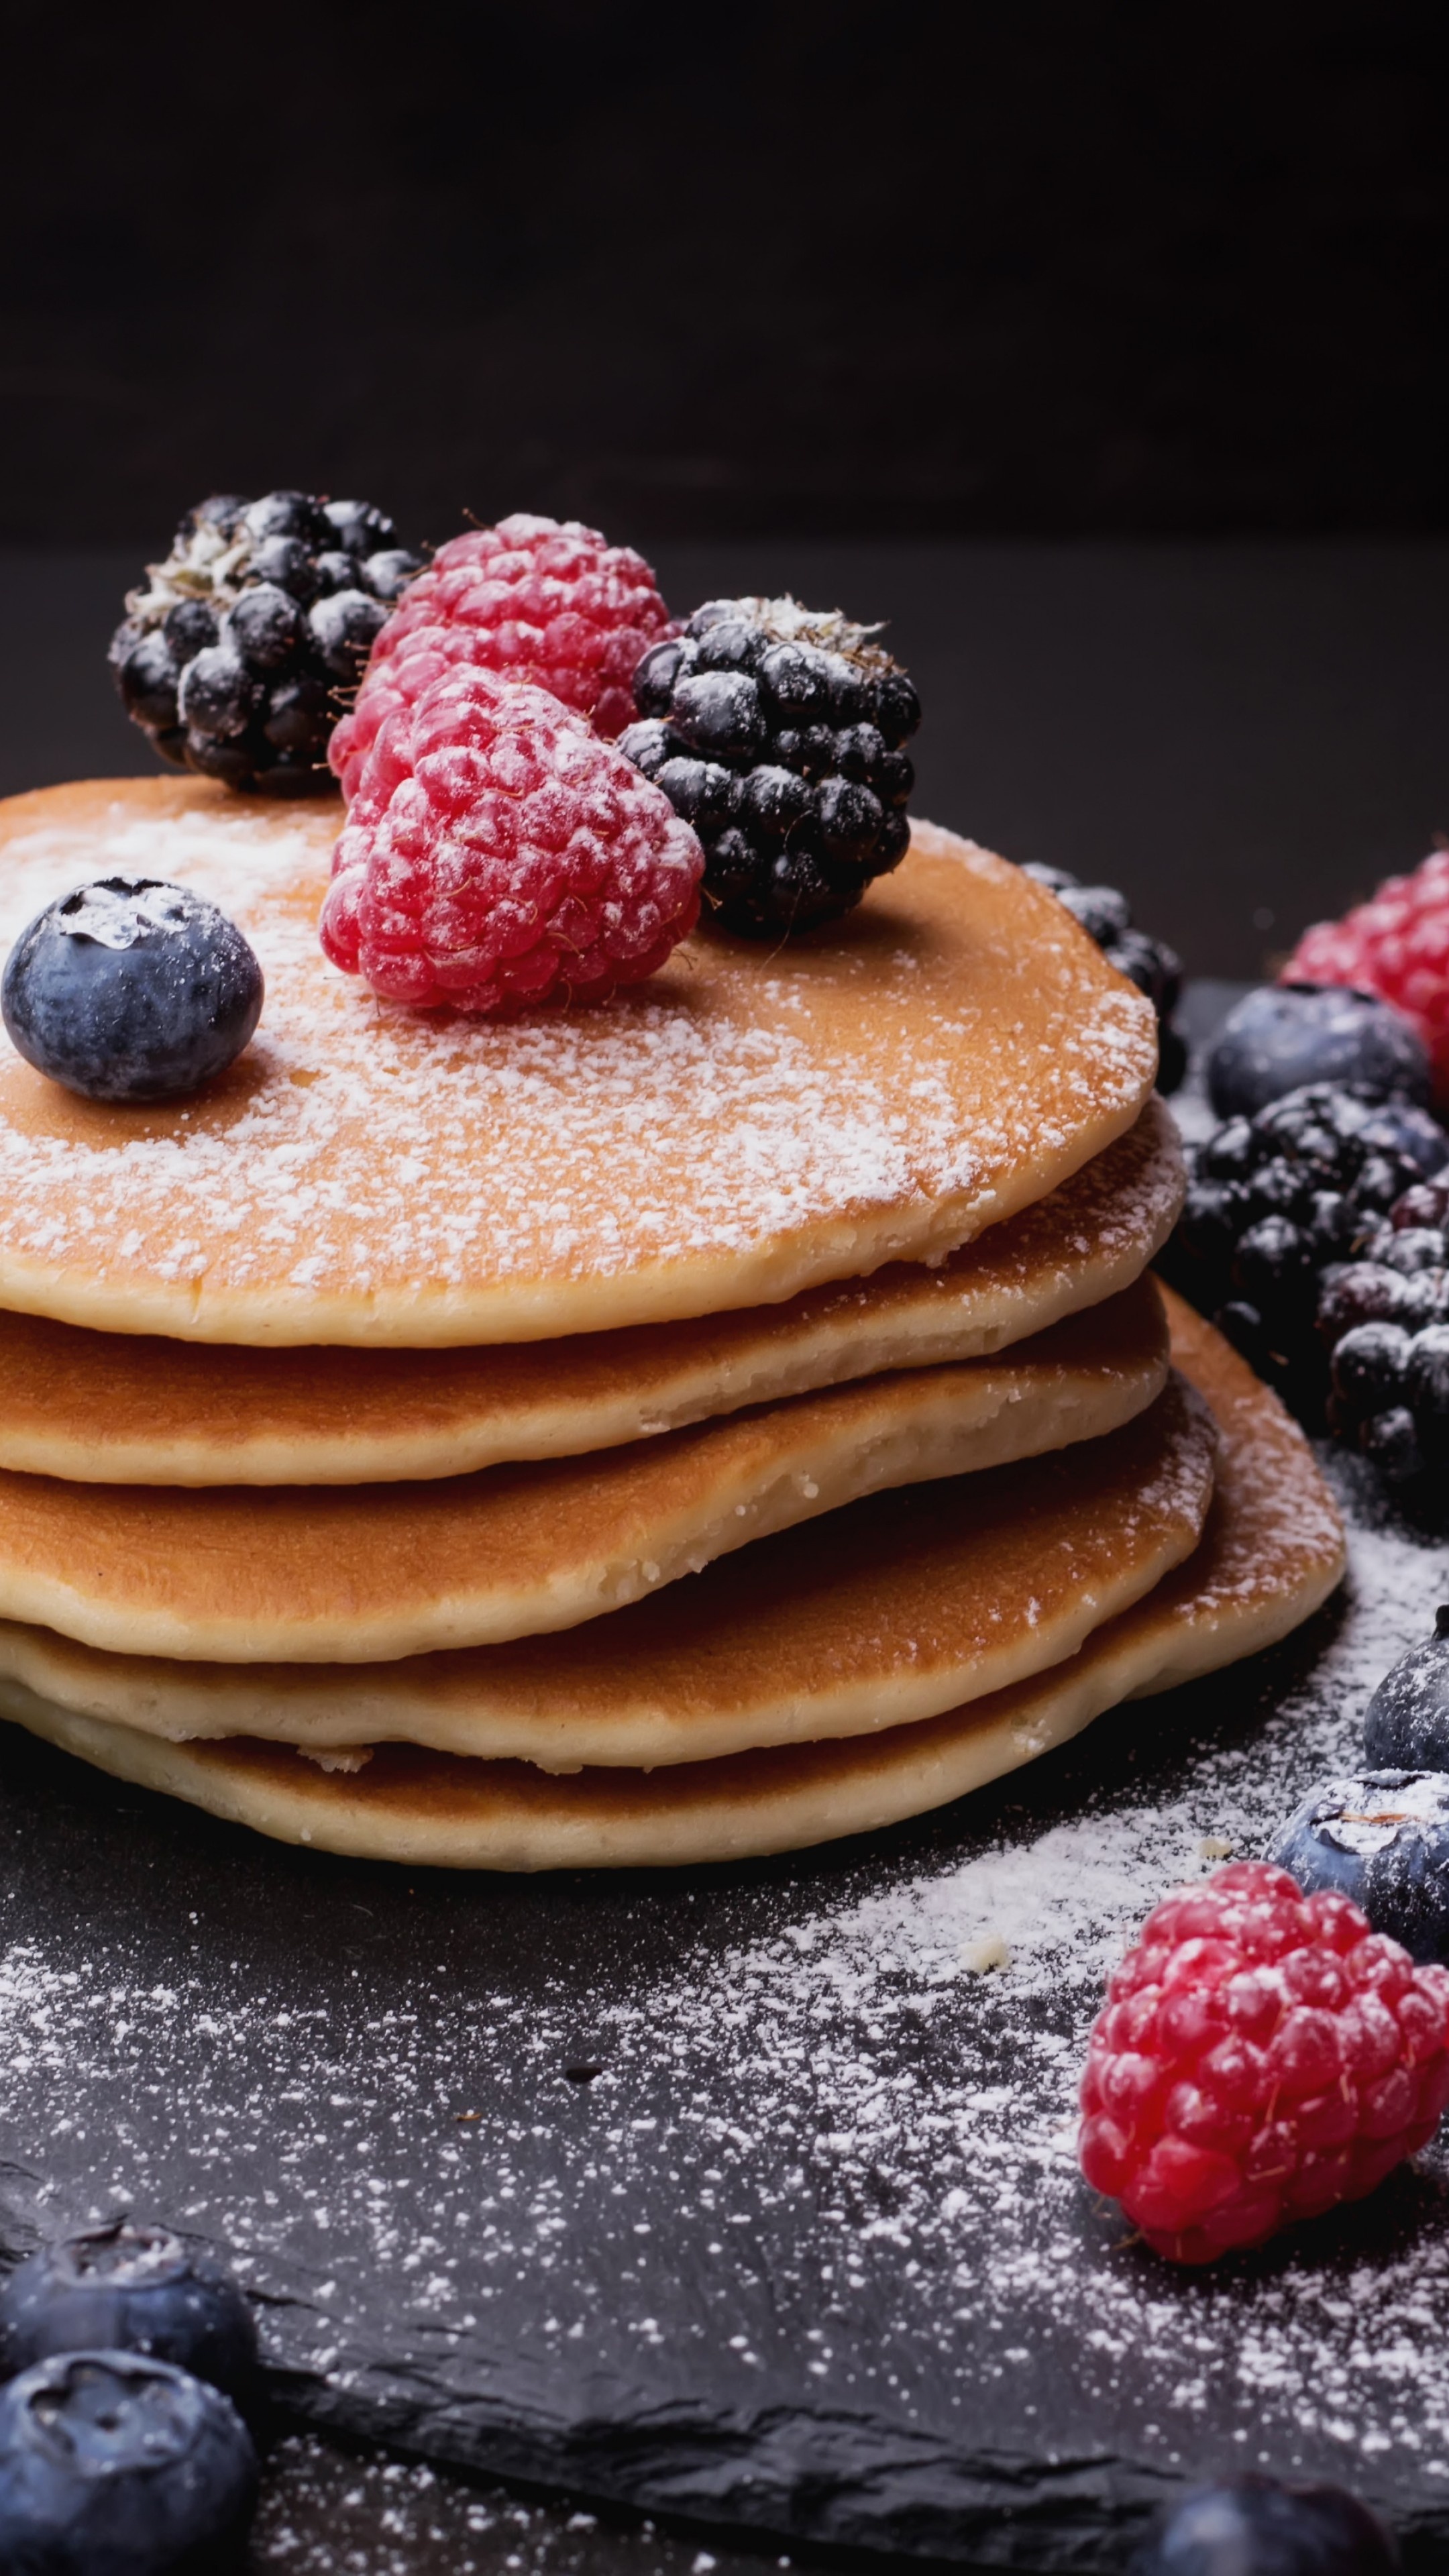 Mouthwatering pancake, Berry medley, Fluffy and delicious, Sensory delight, 2160x3840 4K Phone